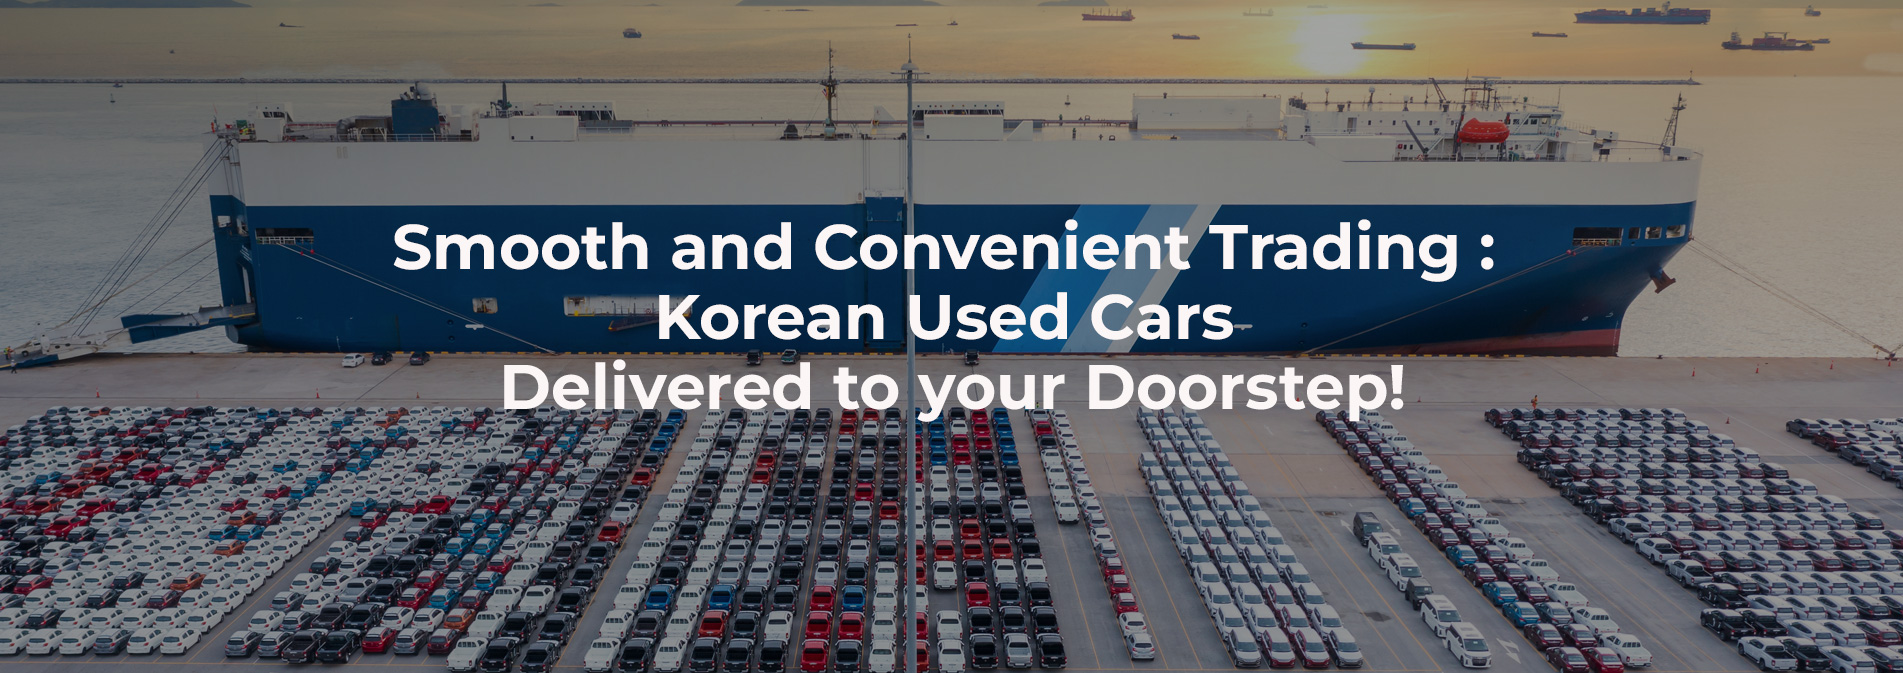 Smooth and Convenient Trading : Korean Used Cars Delivered to your Doorstep!